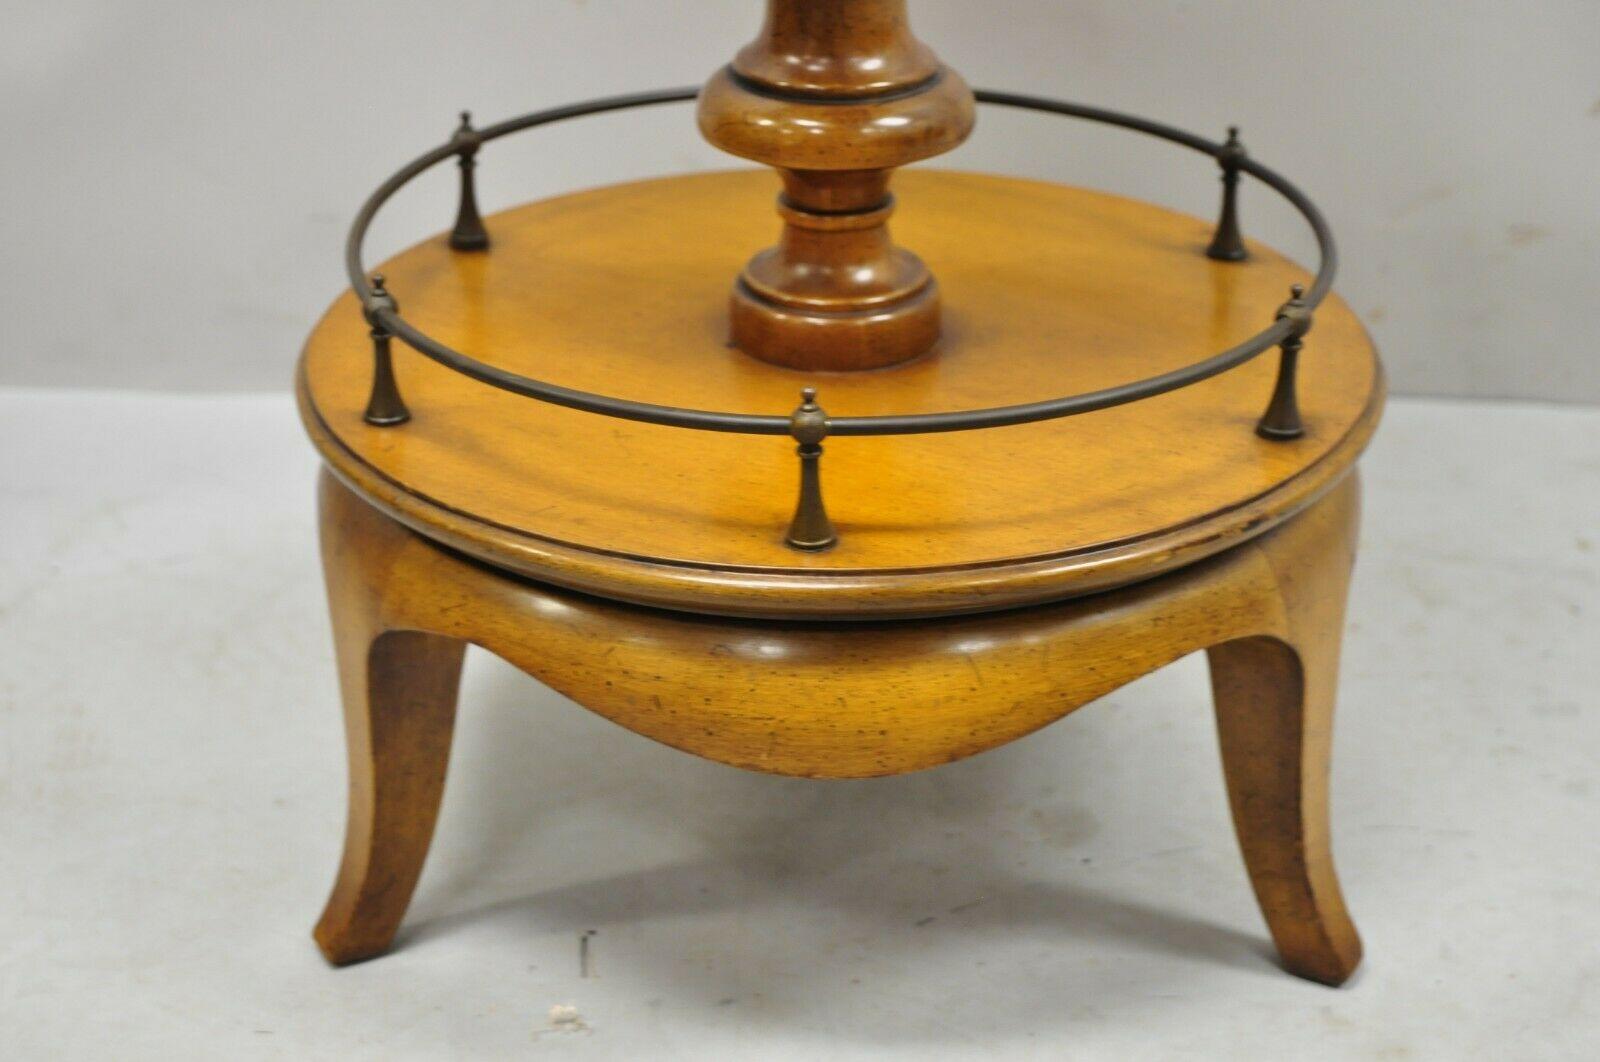 American Weiman Heirloom Small Leather Top Round Smoking Stand Side Table Brass Ring For Sale